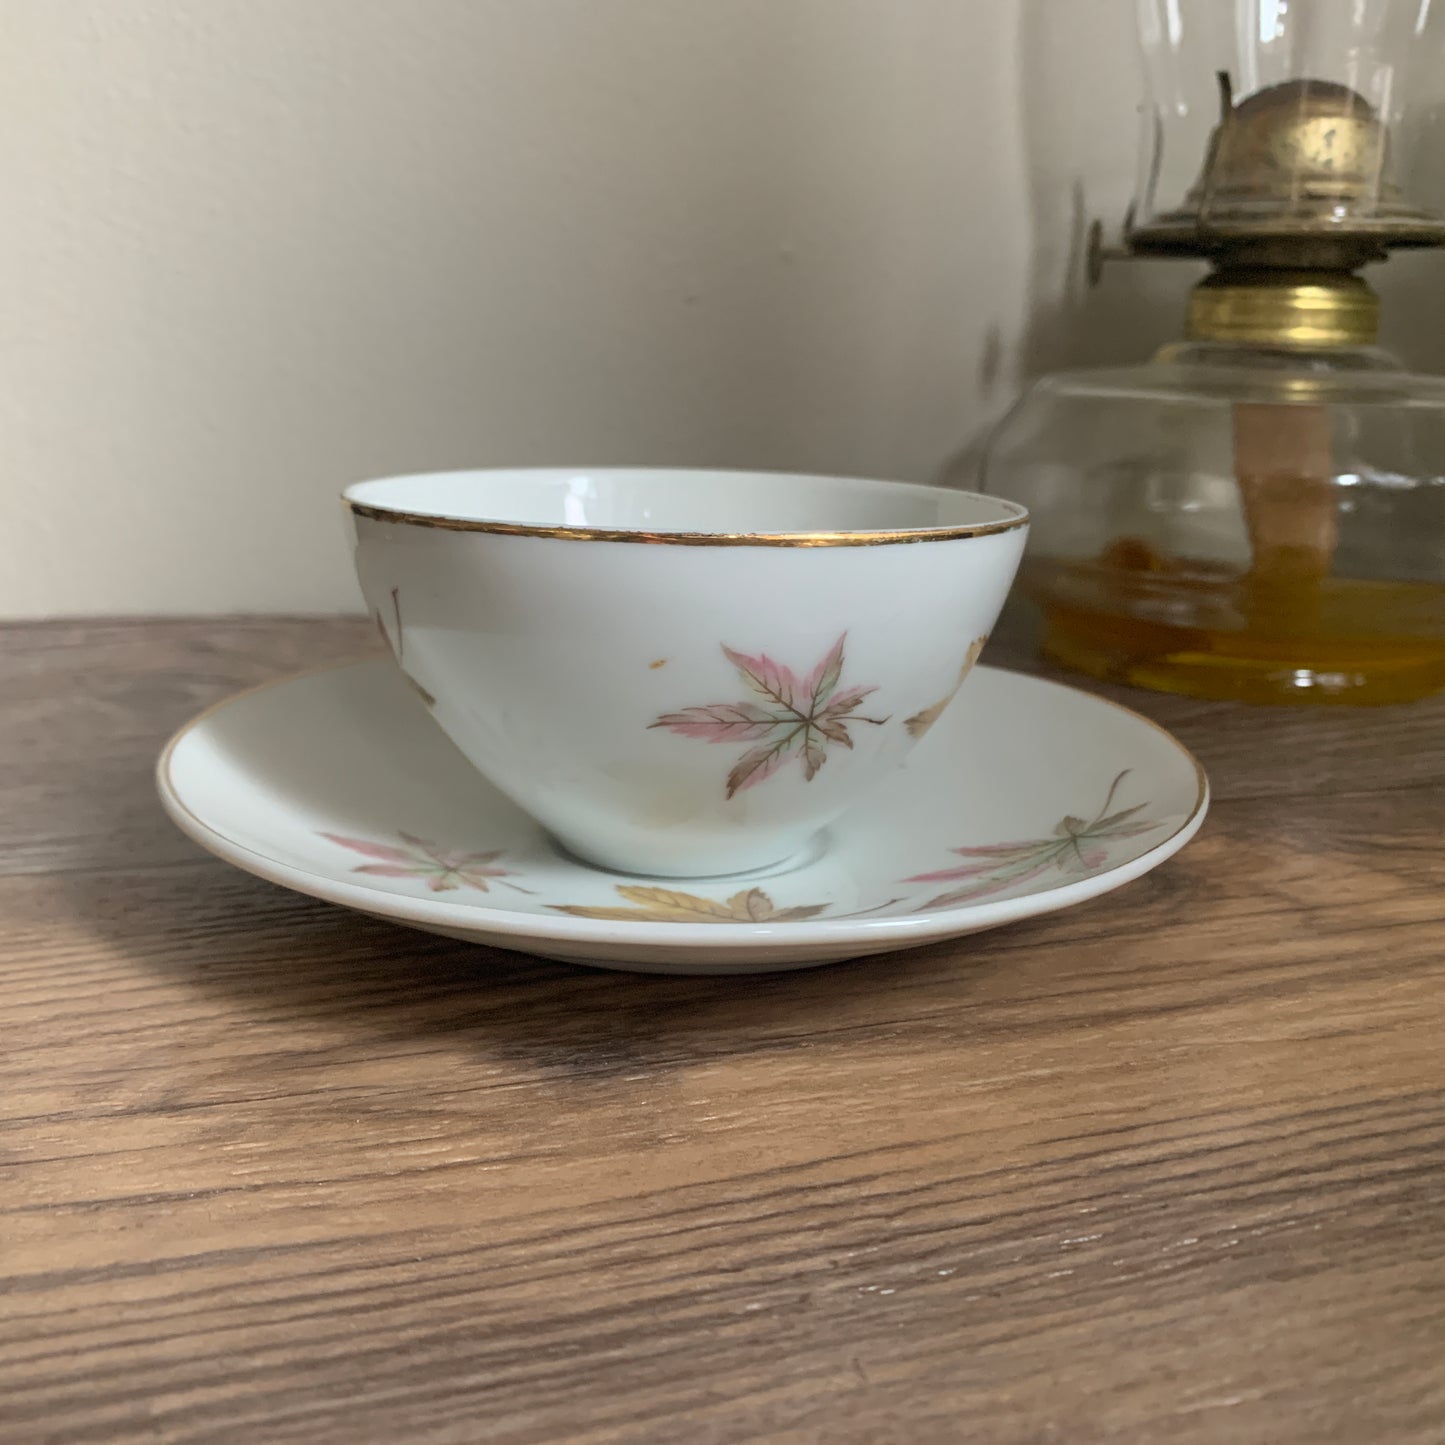 Royal Ming China Vintage Teacup and Saucer with Maple Leaves